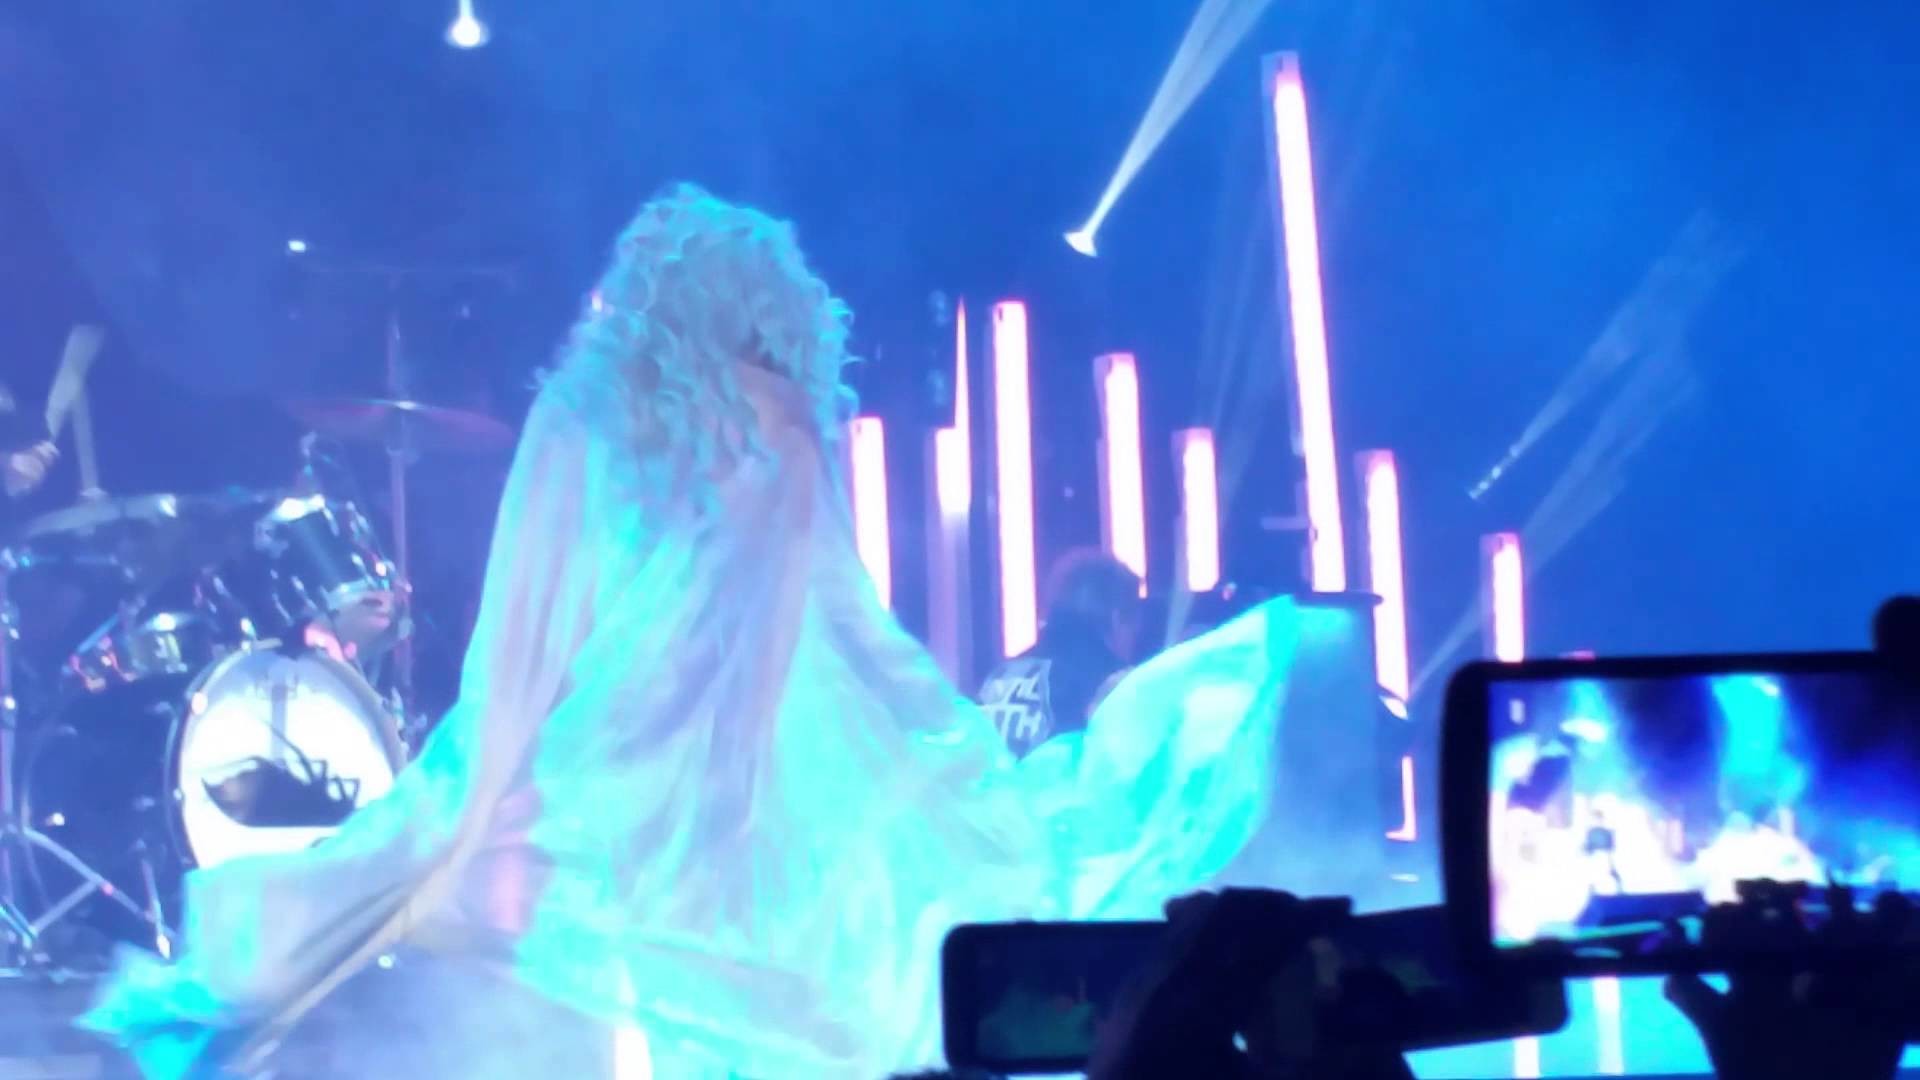 1920x1080 Papa Roach and Maria brink Gravity live 9/18/15